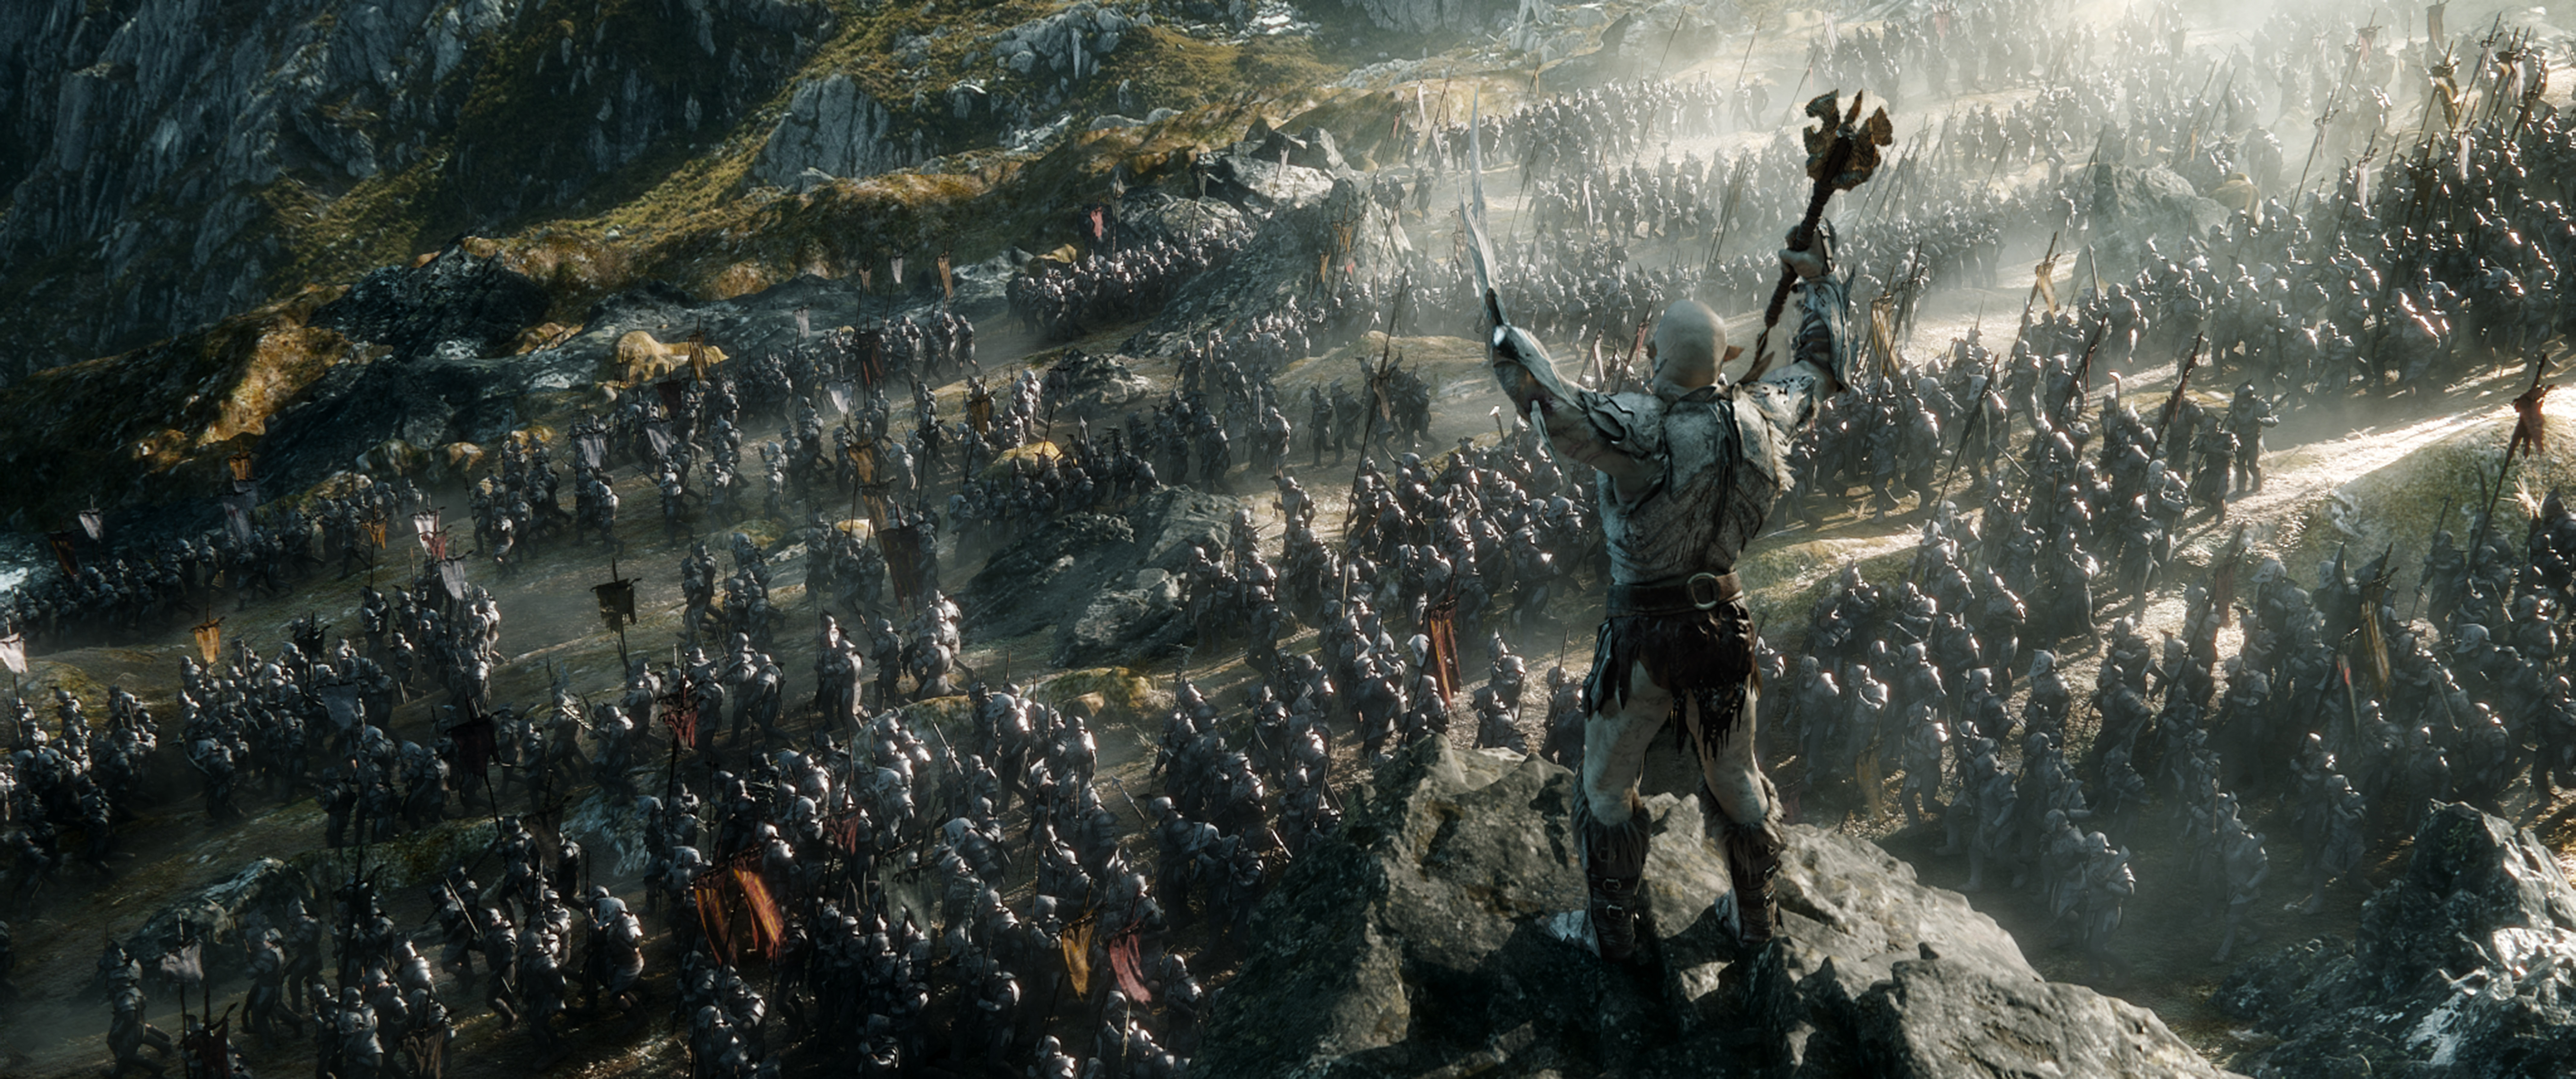 The Hobbit: The Battle Of The Five Armies #9